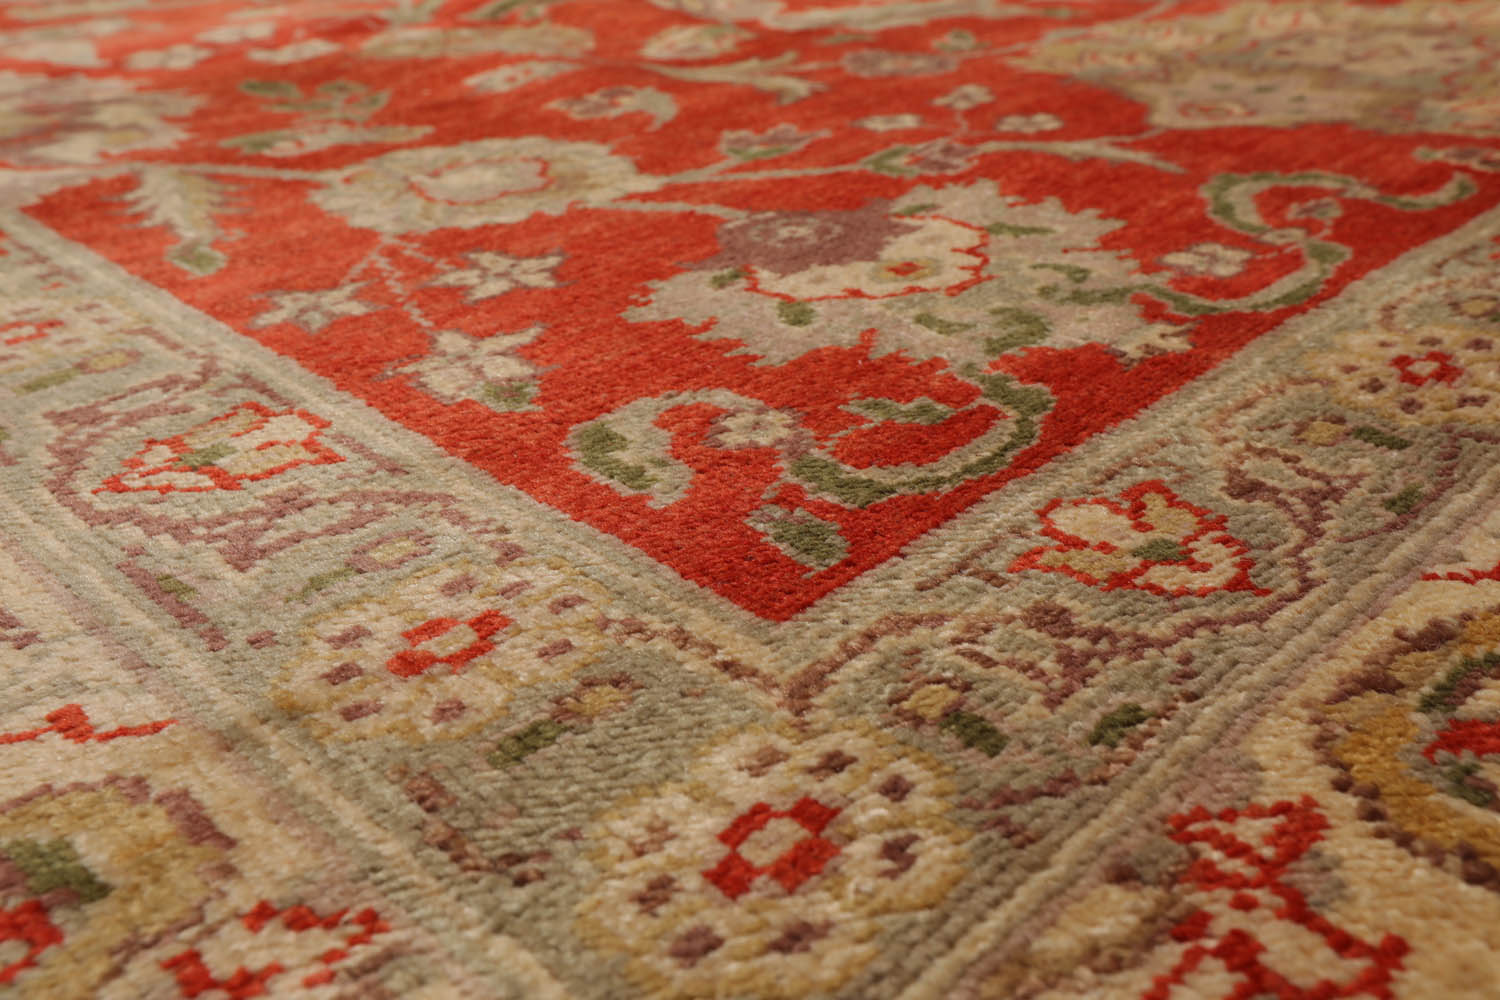 Elsmere 9x12 Hand Knotted 100% Wool Peshawar Traditional Oriental Area Rug Coral, Beige Color